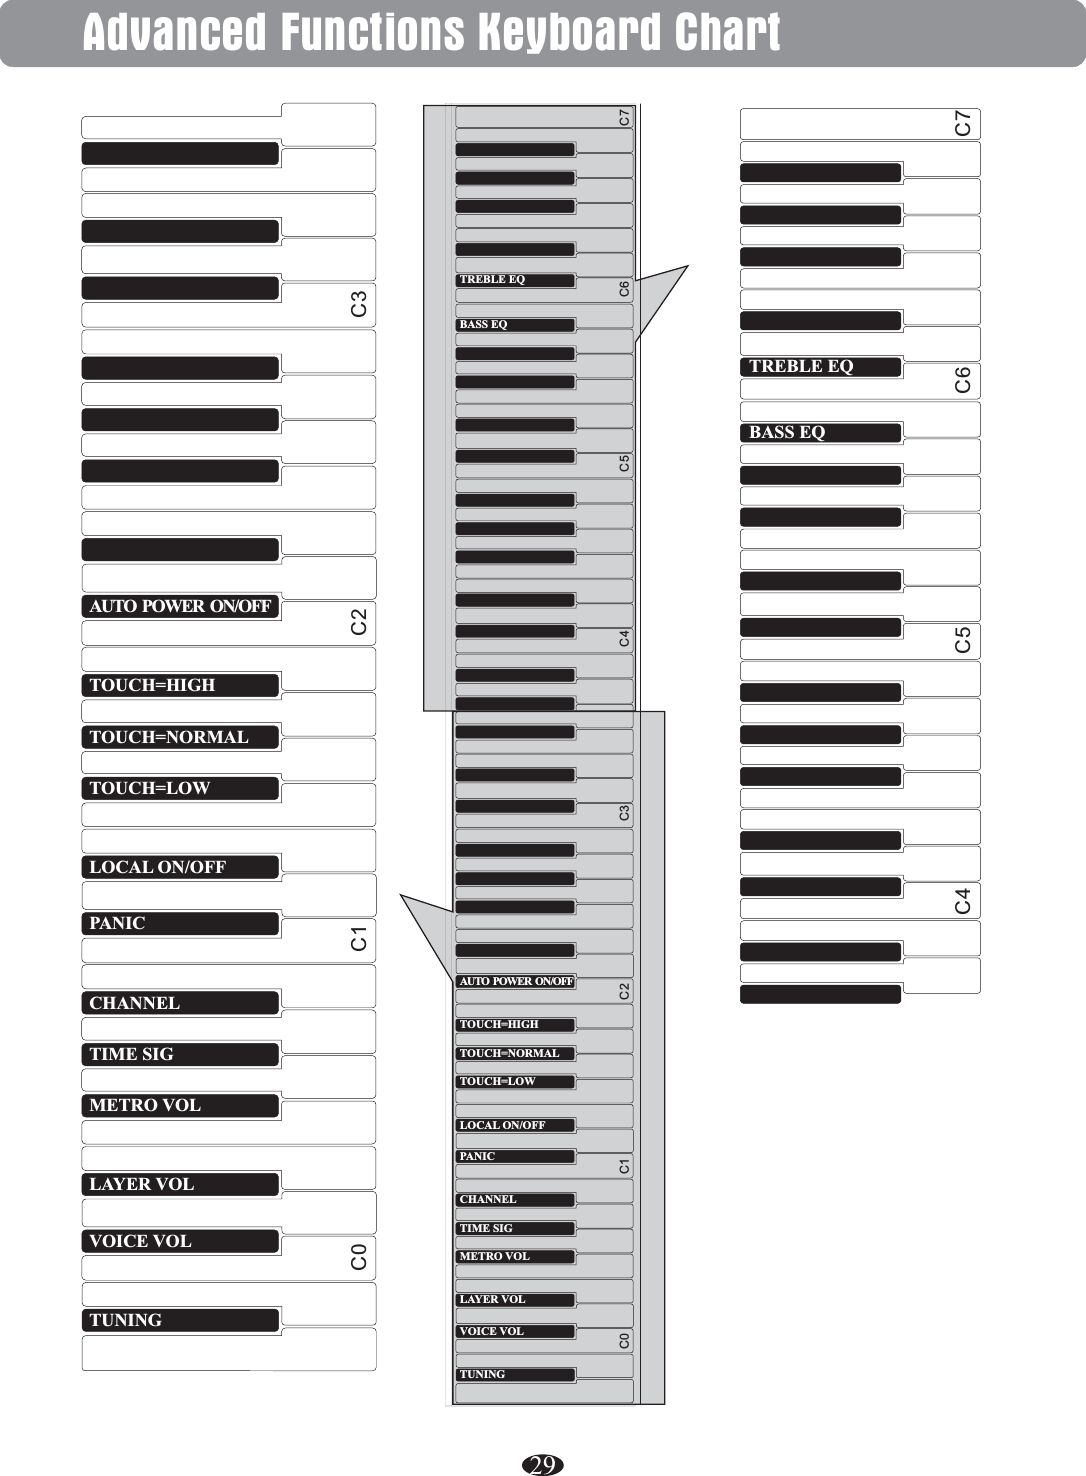 Advanced Functions Keyboard Chart29C4 C5 C7C6BASS EQTREBLE EQC0 C1 C2 C3TOUCH=HIGHAUTO POWER ON/OFFTOUCH=NORMALTOUCH=LOWLOCAL ON/OFFPANICCHANNELTIME SIGMETRO VOLLAYER VOLVOICE VOLTUNINGC0                                              C1                                              C2                                               C3                                              C4                                              C5                                              C6                                             C7 BASS EQTREBLE EQTOUCH=HIGHTOUCH=NORMALTOUCH=LOWLOCAL ON/OFFPANICCHANNELTIME SIGMETRO VOLLAYER VOLVOICE VOLTUNINGAUTO POWER ON/OFF